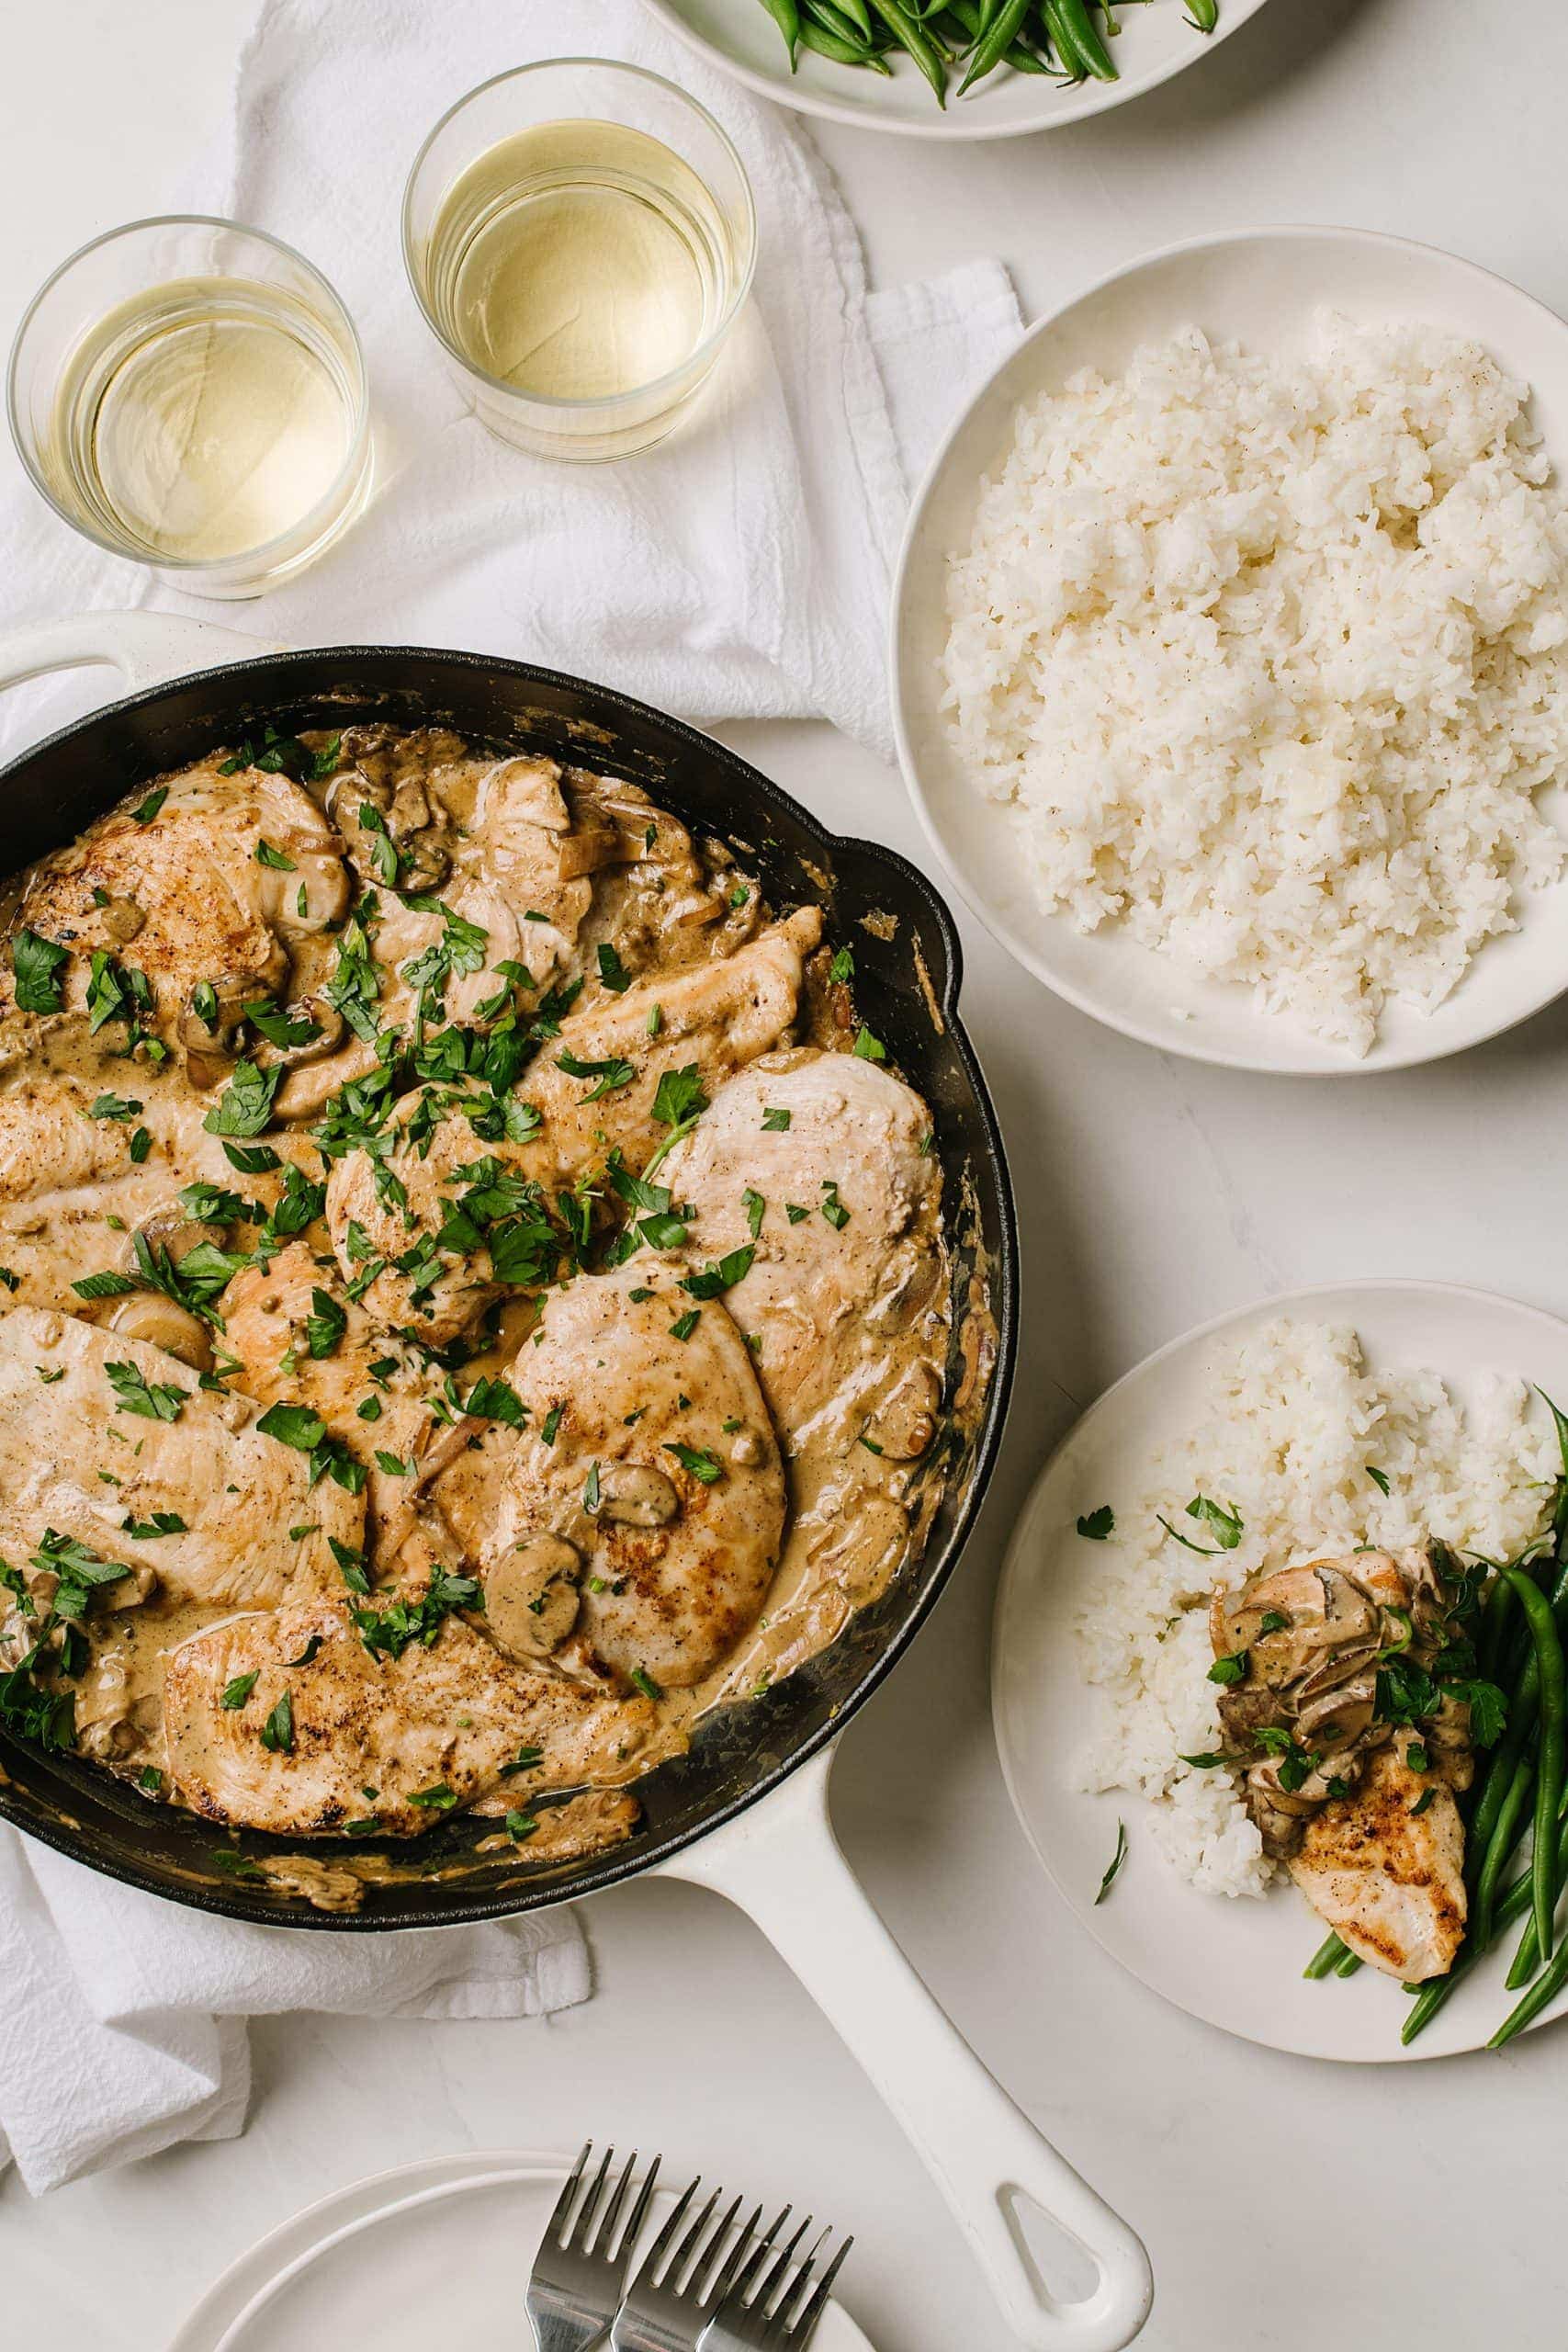 skillet of boursin chicken with glasses of wine and bowl of rice with a plate of chicken with green beans and rice